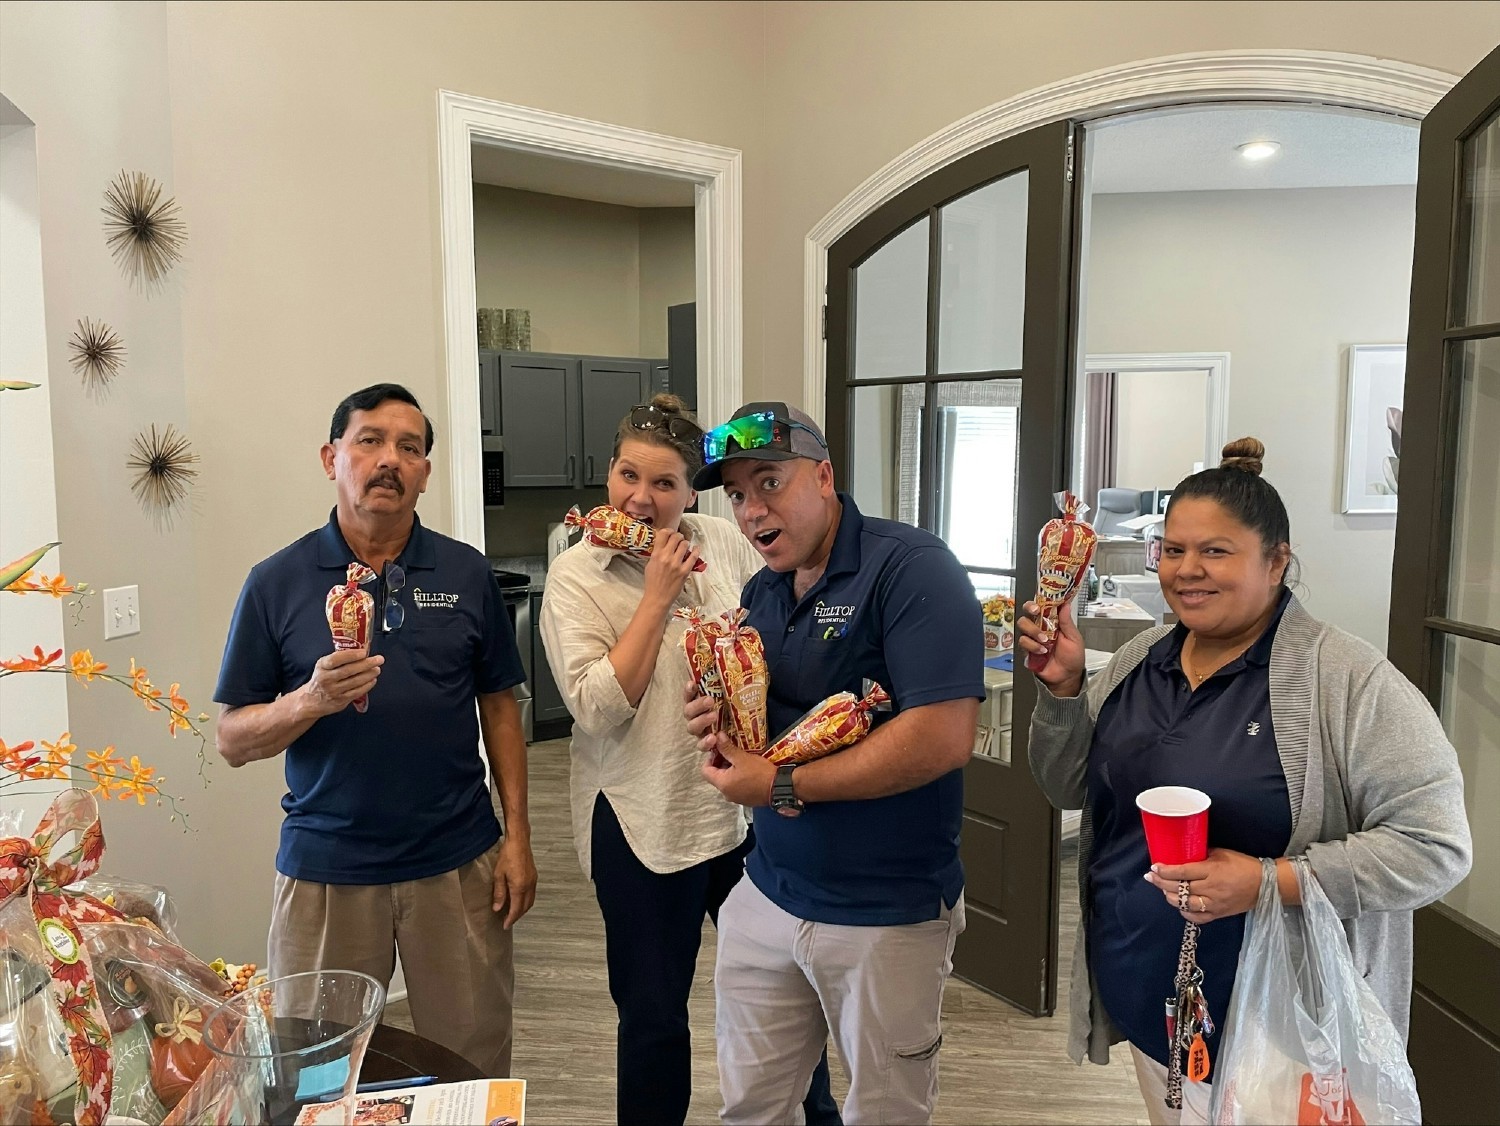 Hilltop Residential celebrating during our Employee Appreciation week!